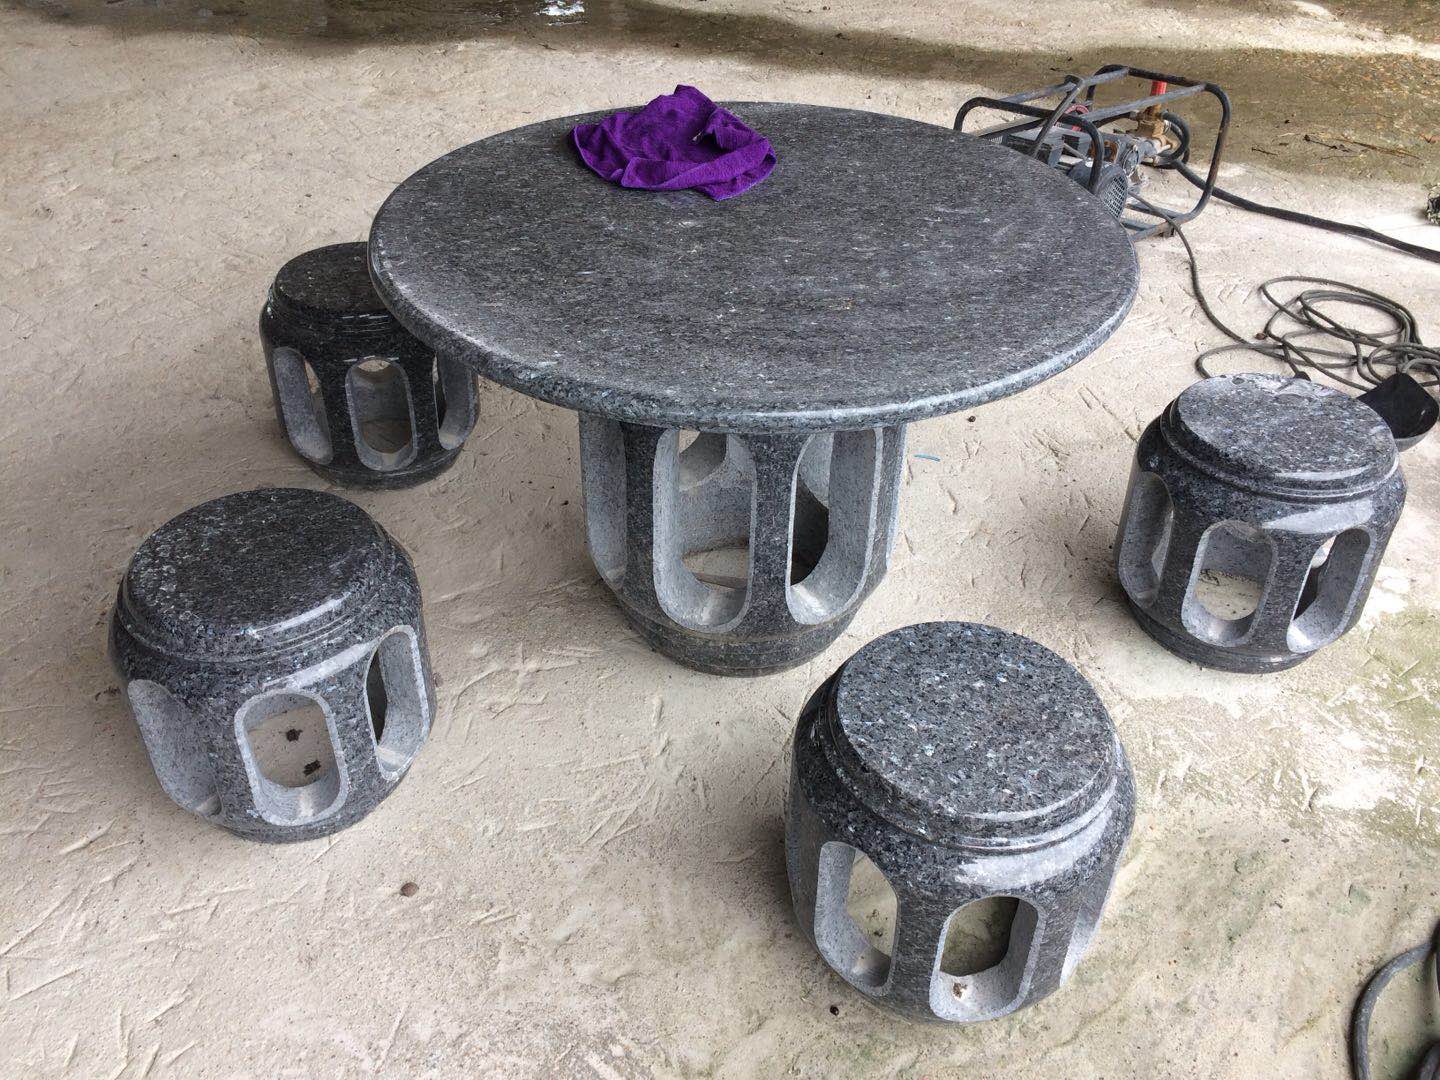 Blue Pearl Granite Chinese Style Garden Table And Chair Sets